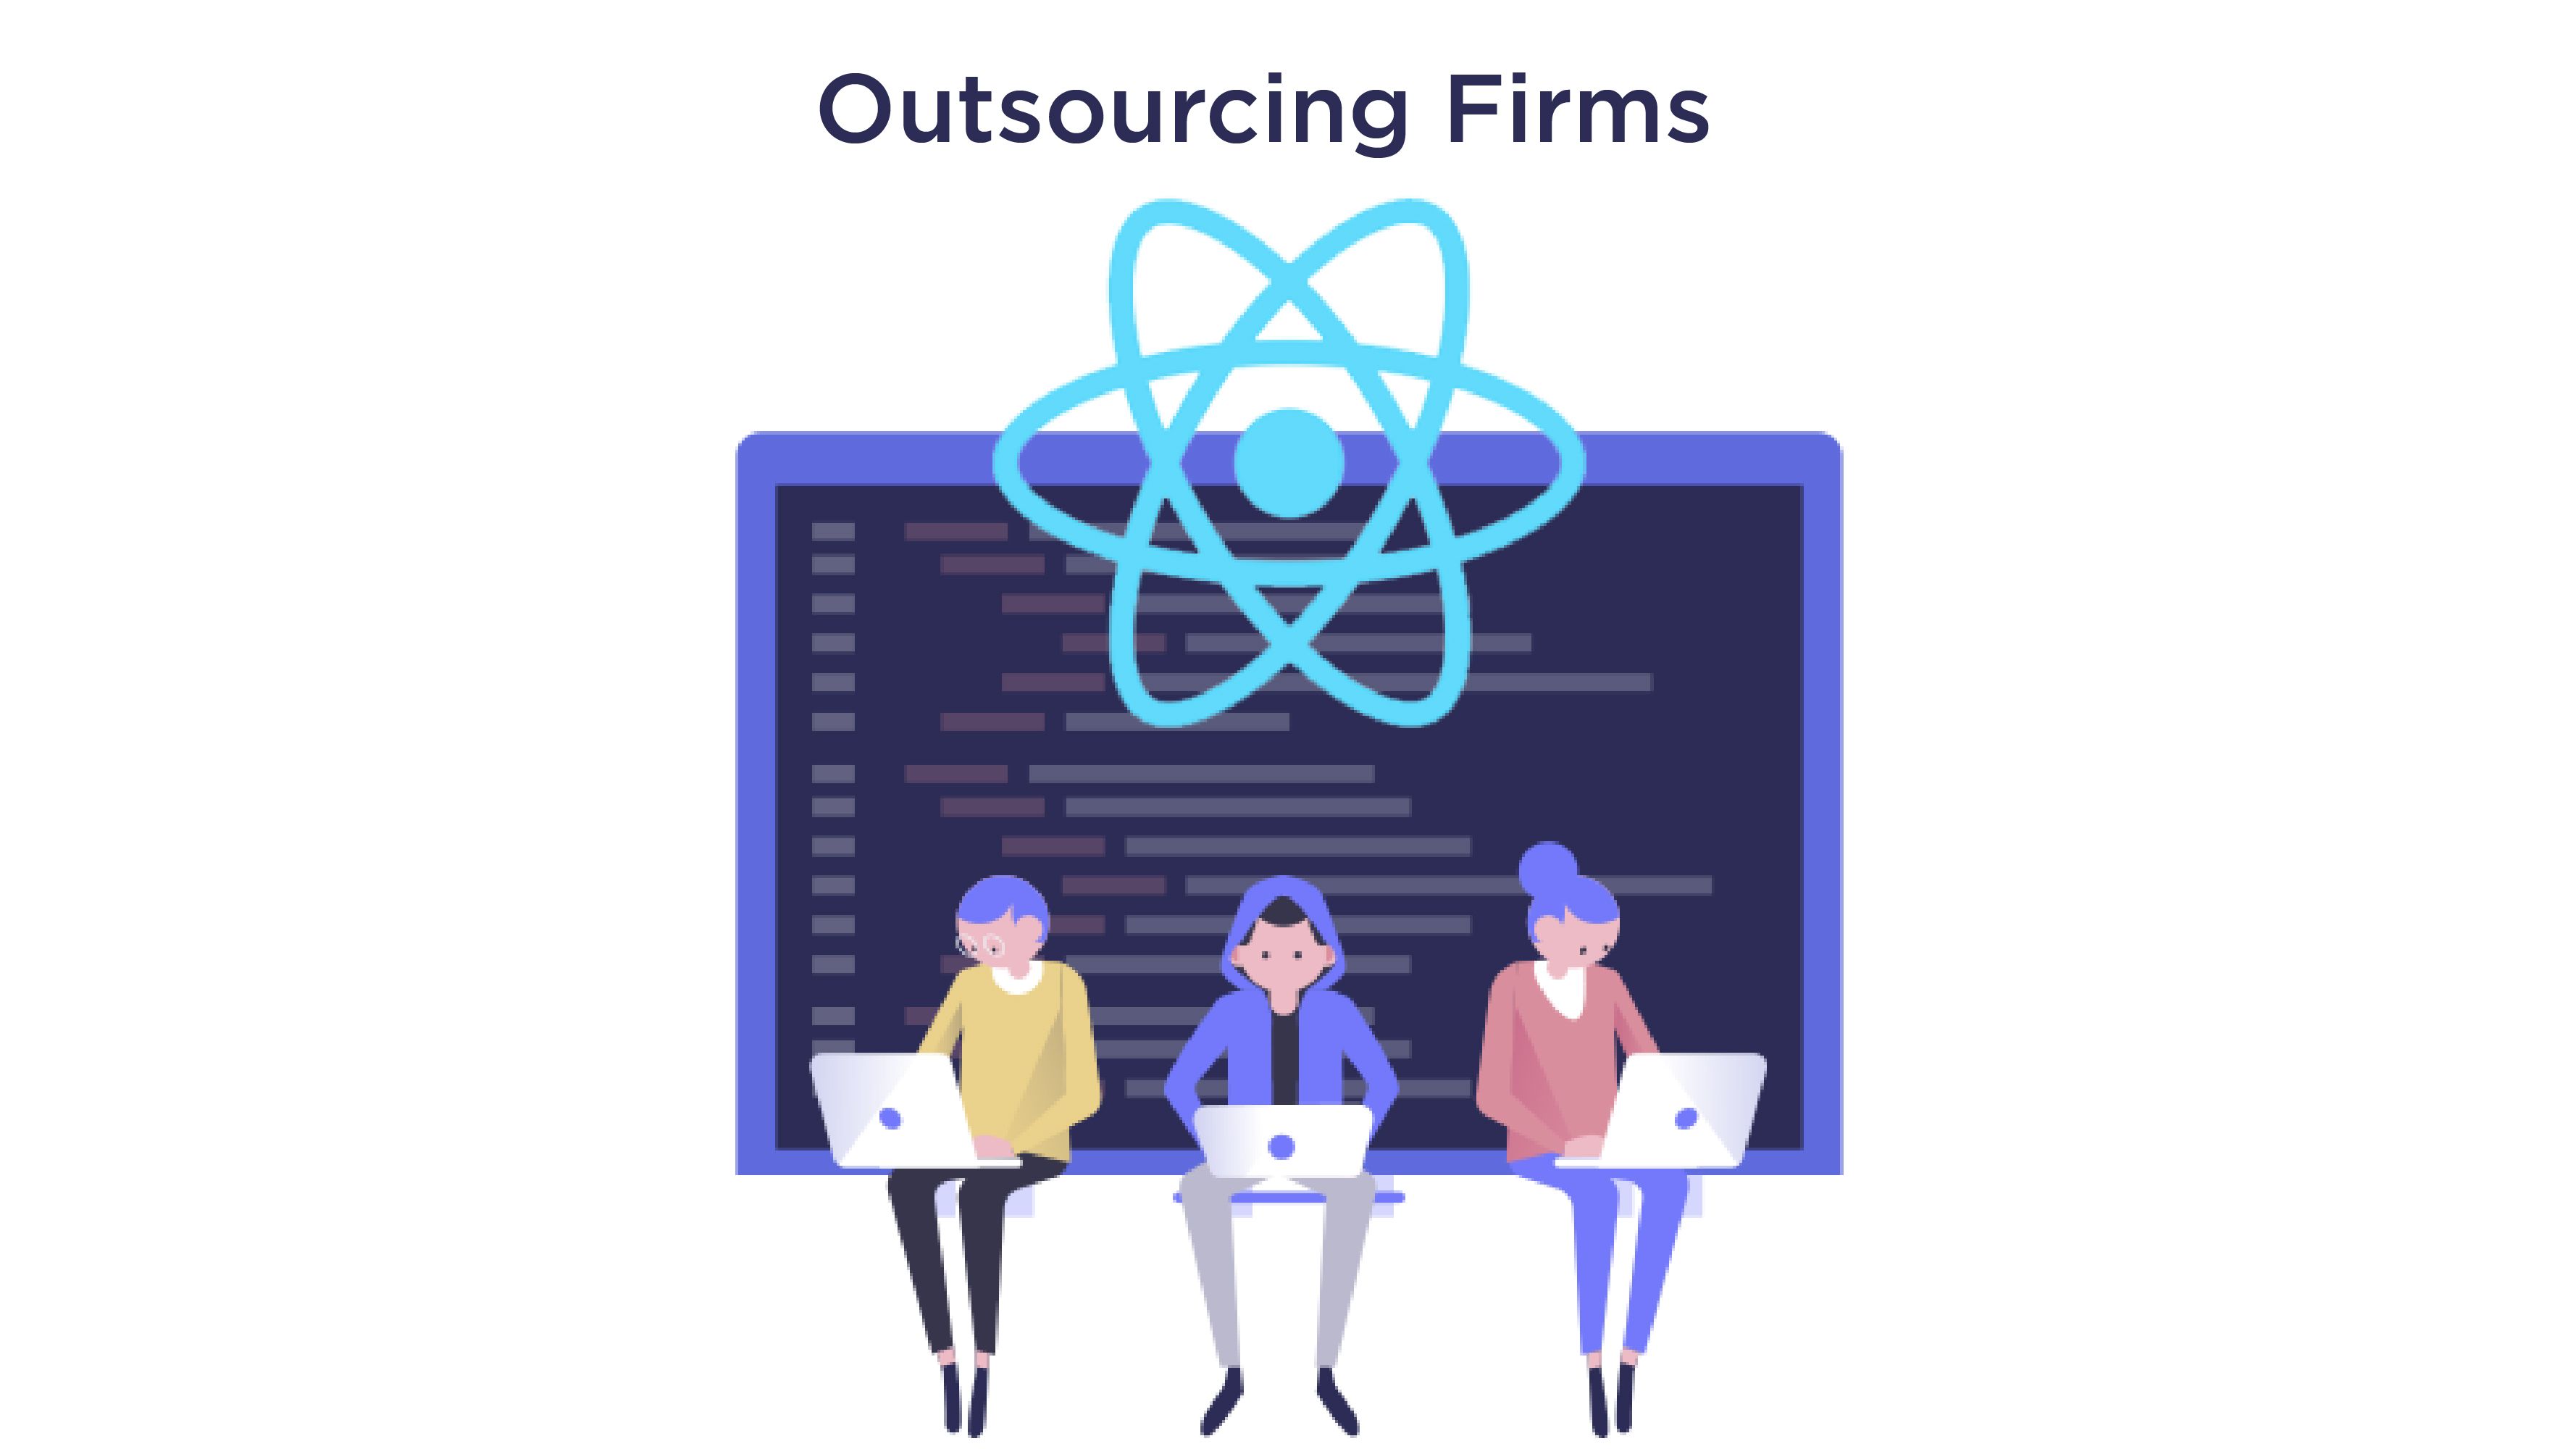 From Outsourcing Firms